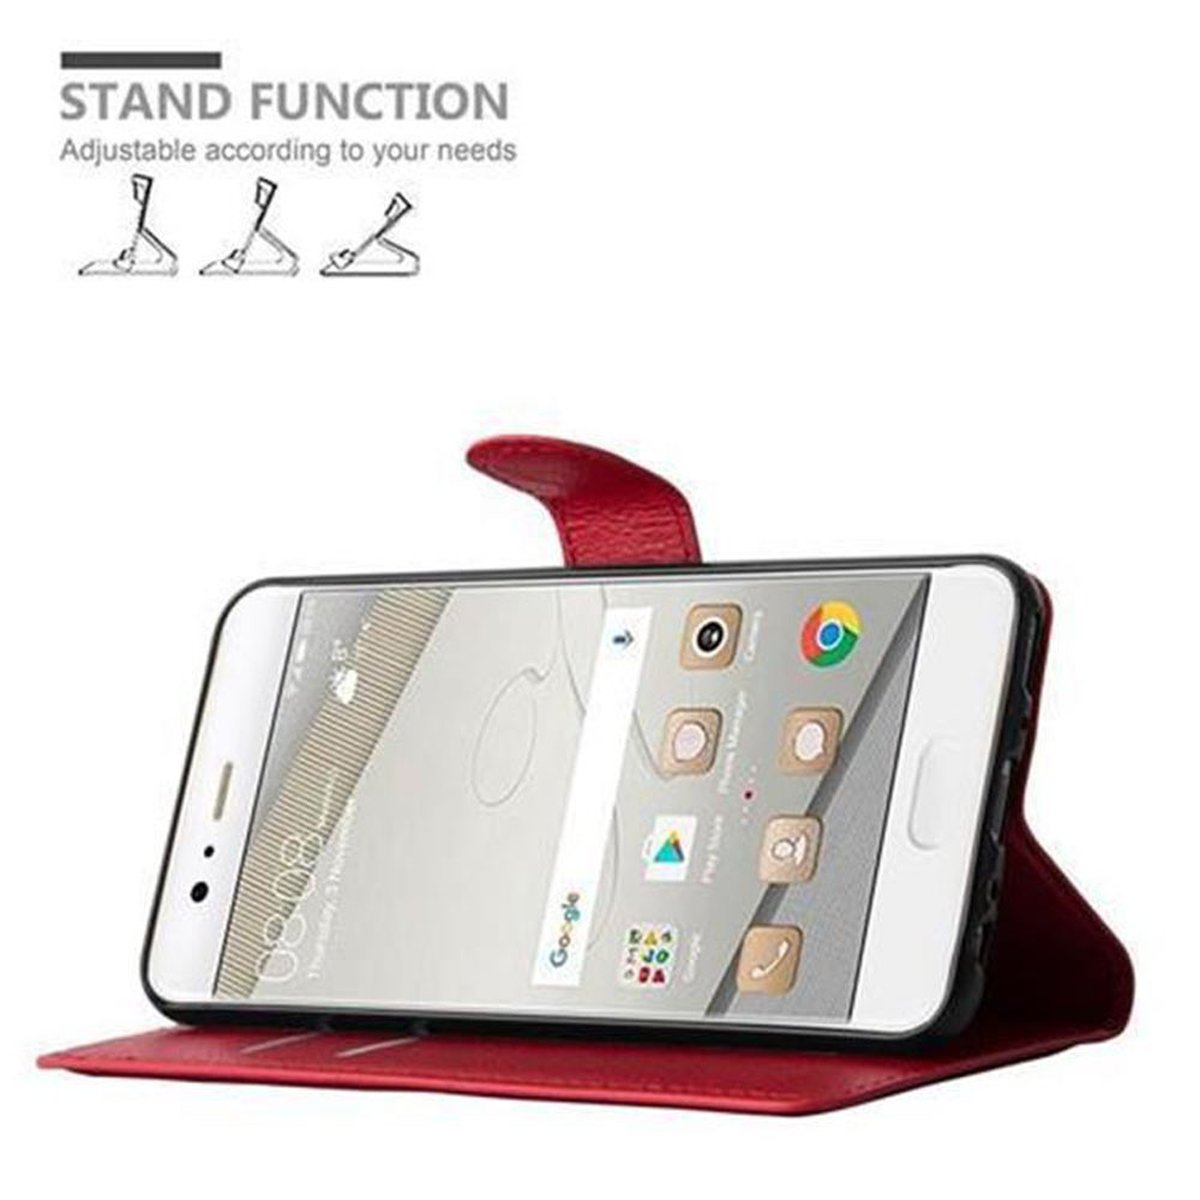 Standfunktion, Book Huawei, Bookcover, P10, KARMIN ROT Hülle CADORABO